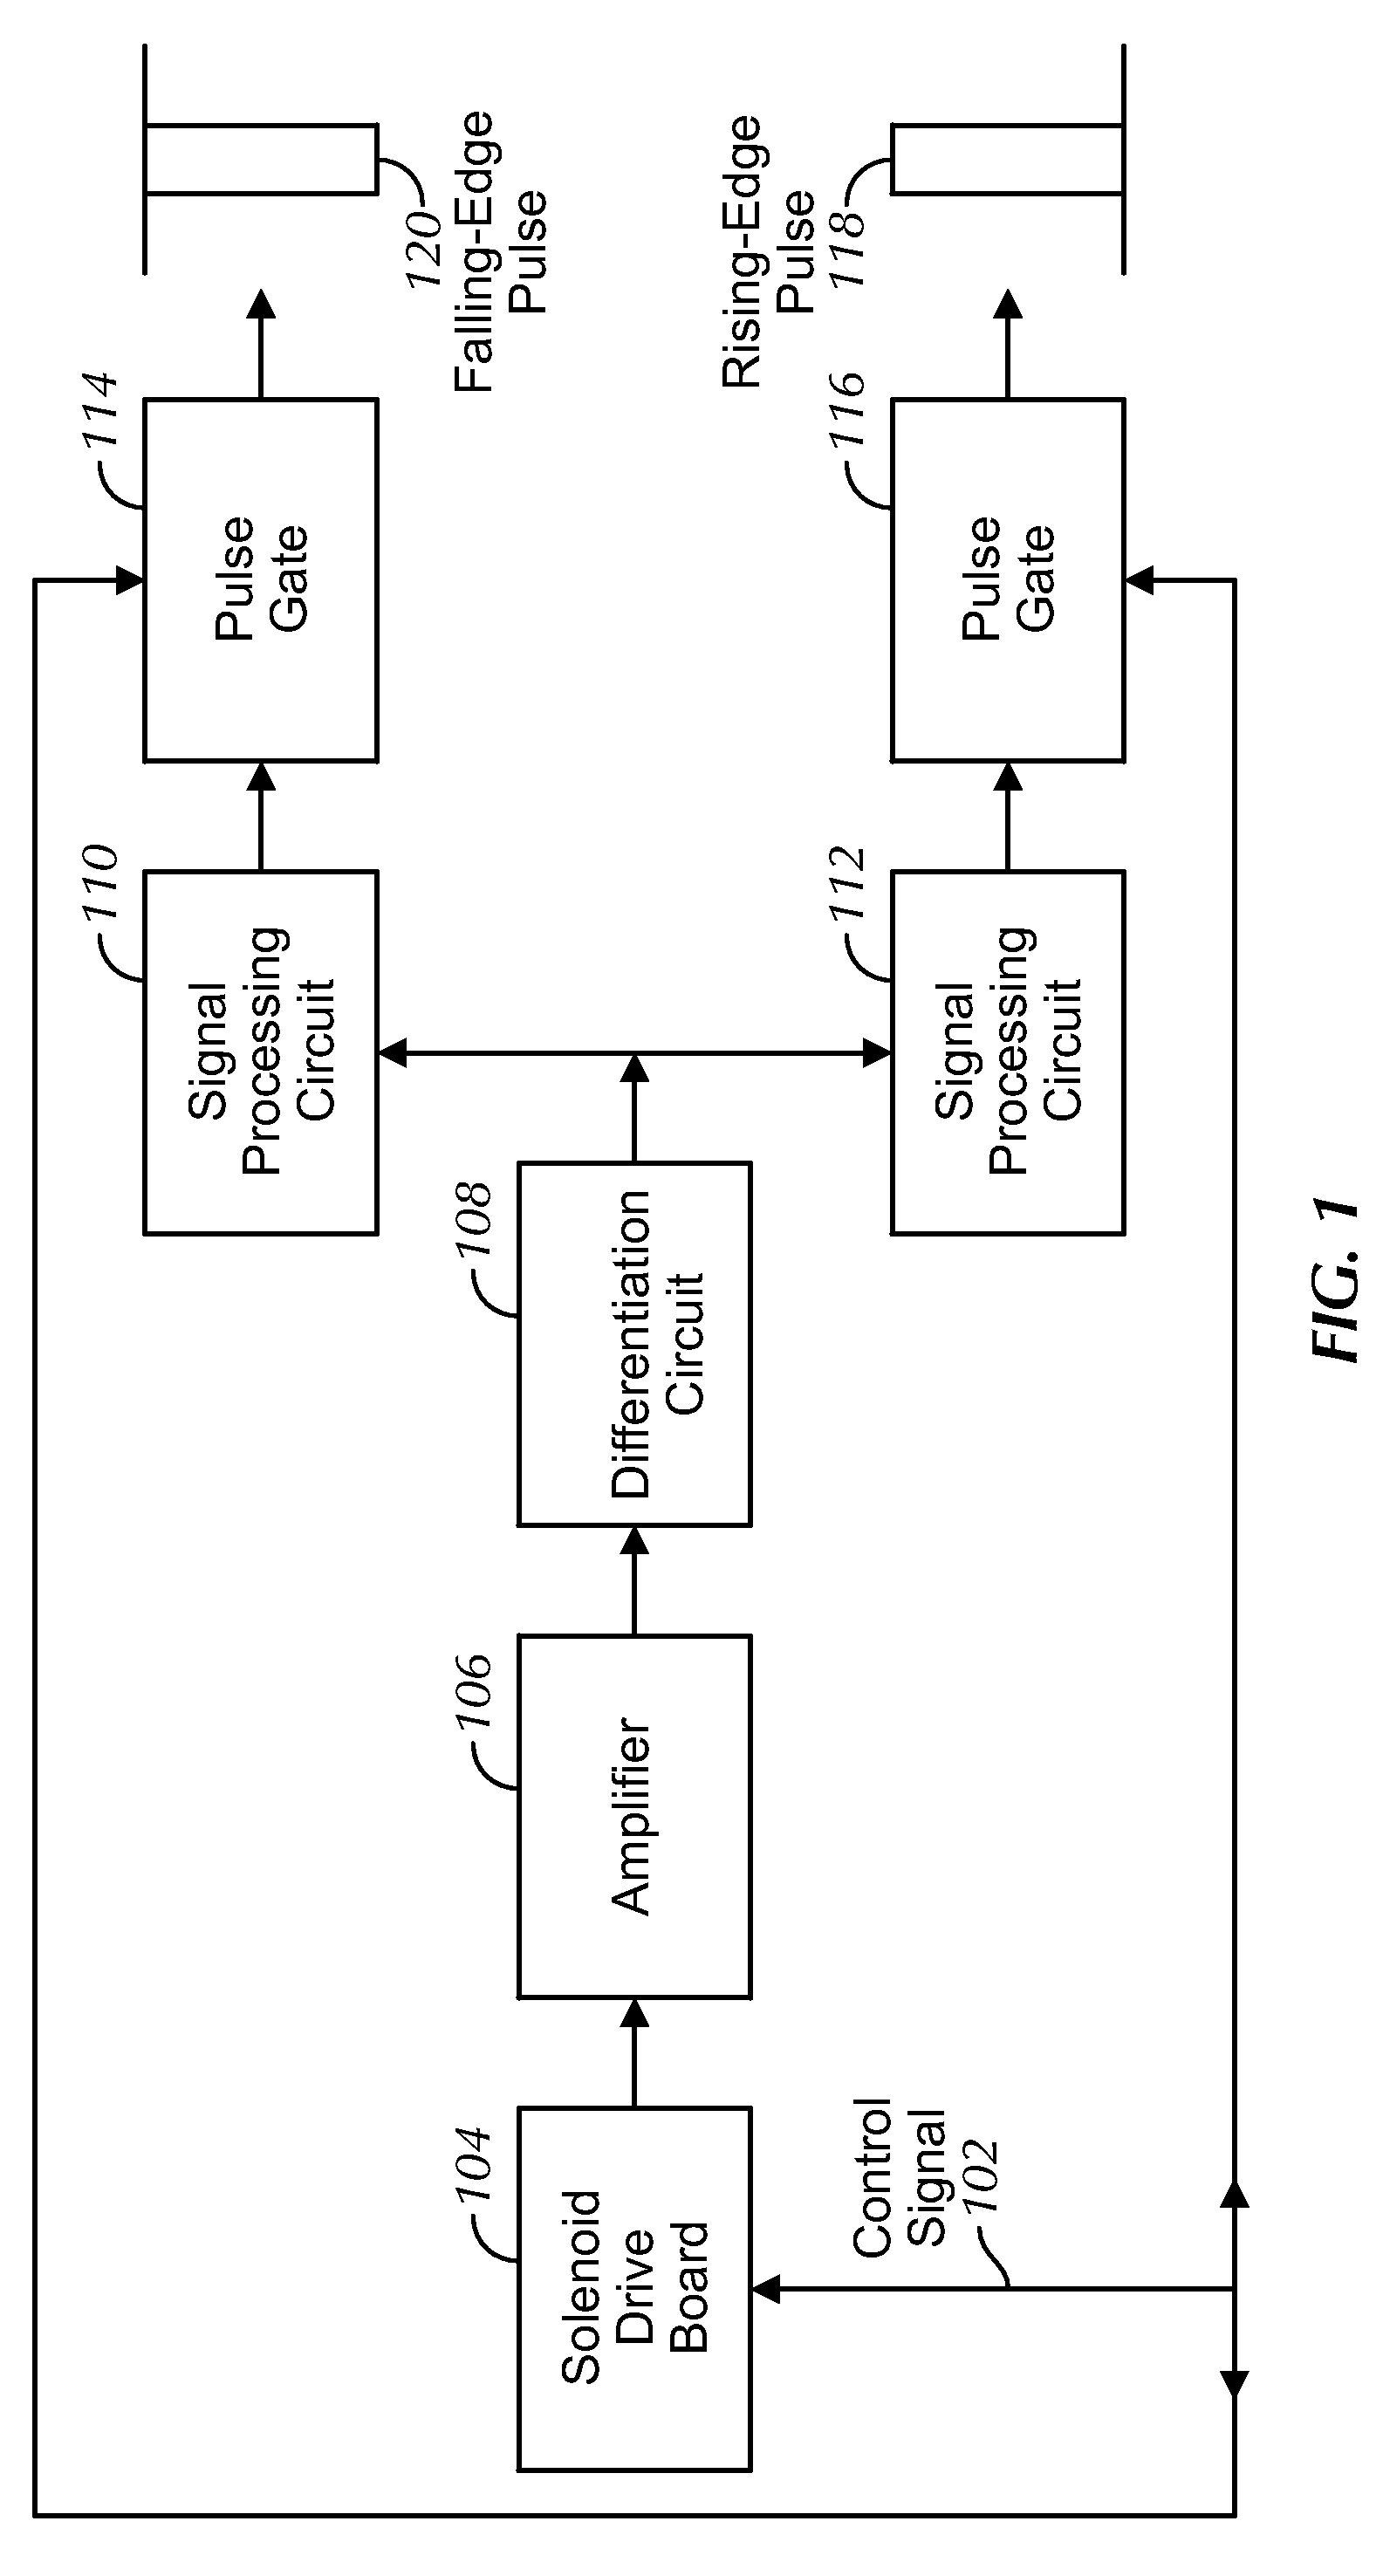 Movement detection circuit of solenoid shear seal valve on subsea pressure control system and method of detecting movement of solenoid actuator